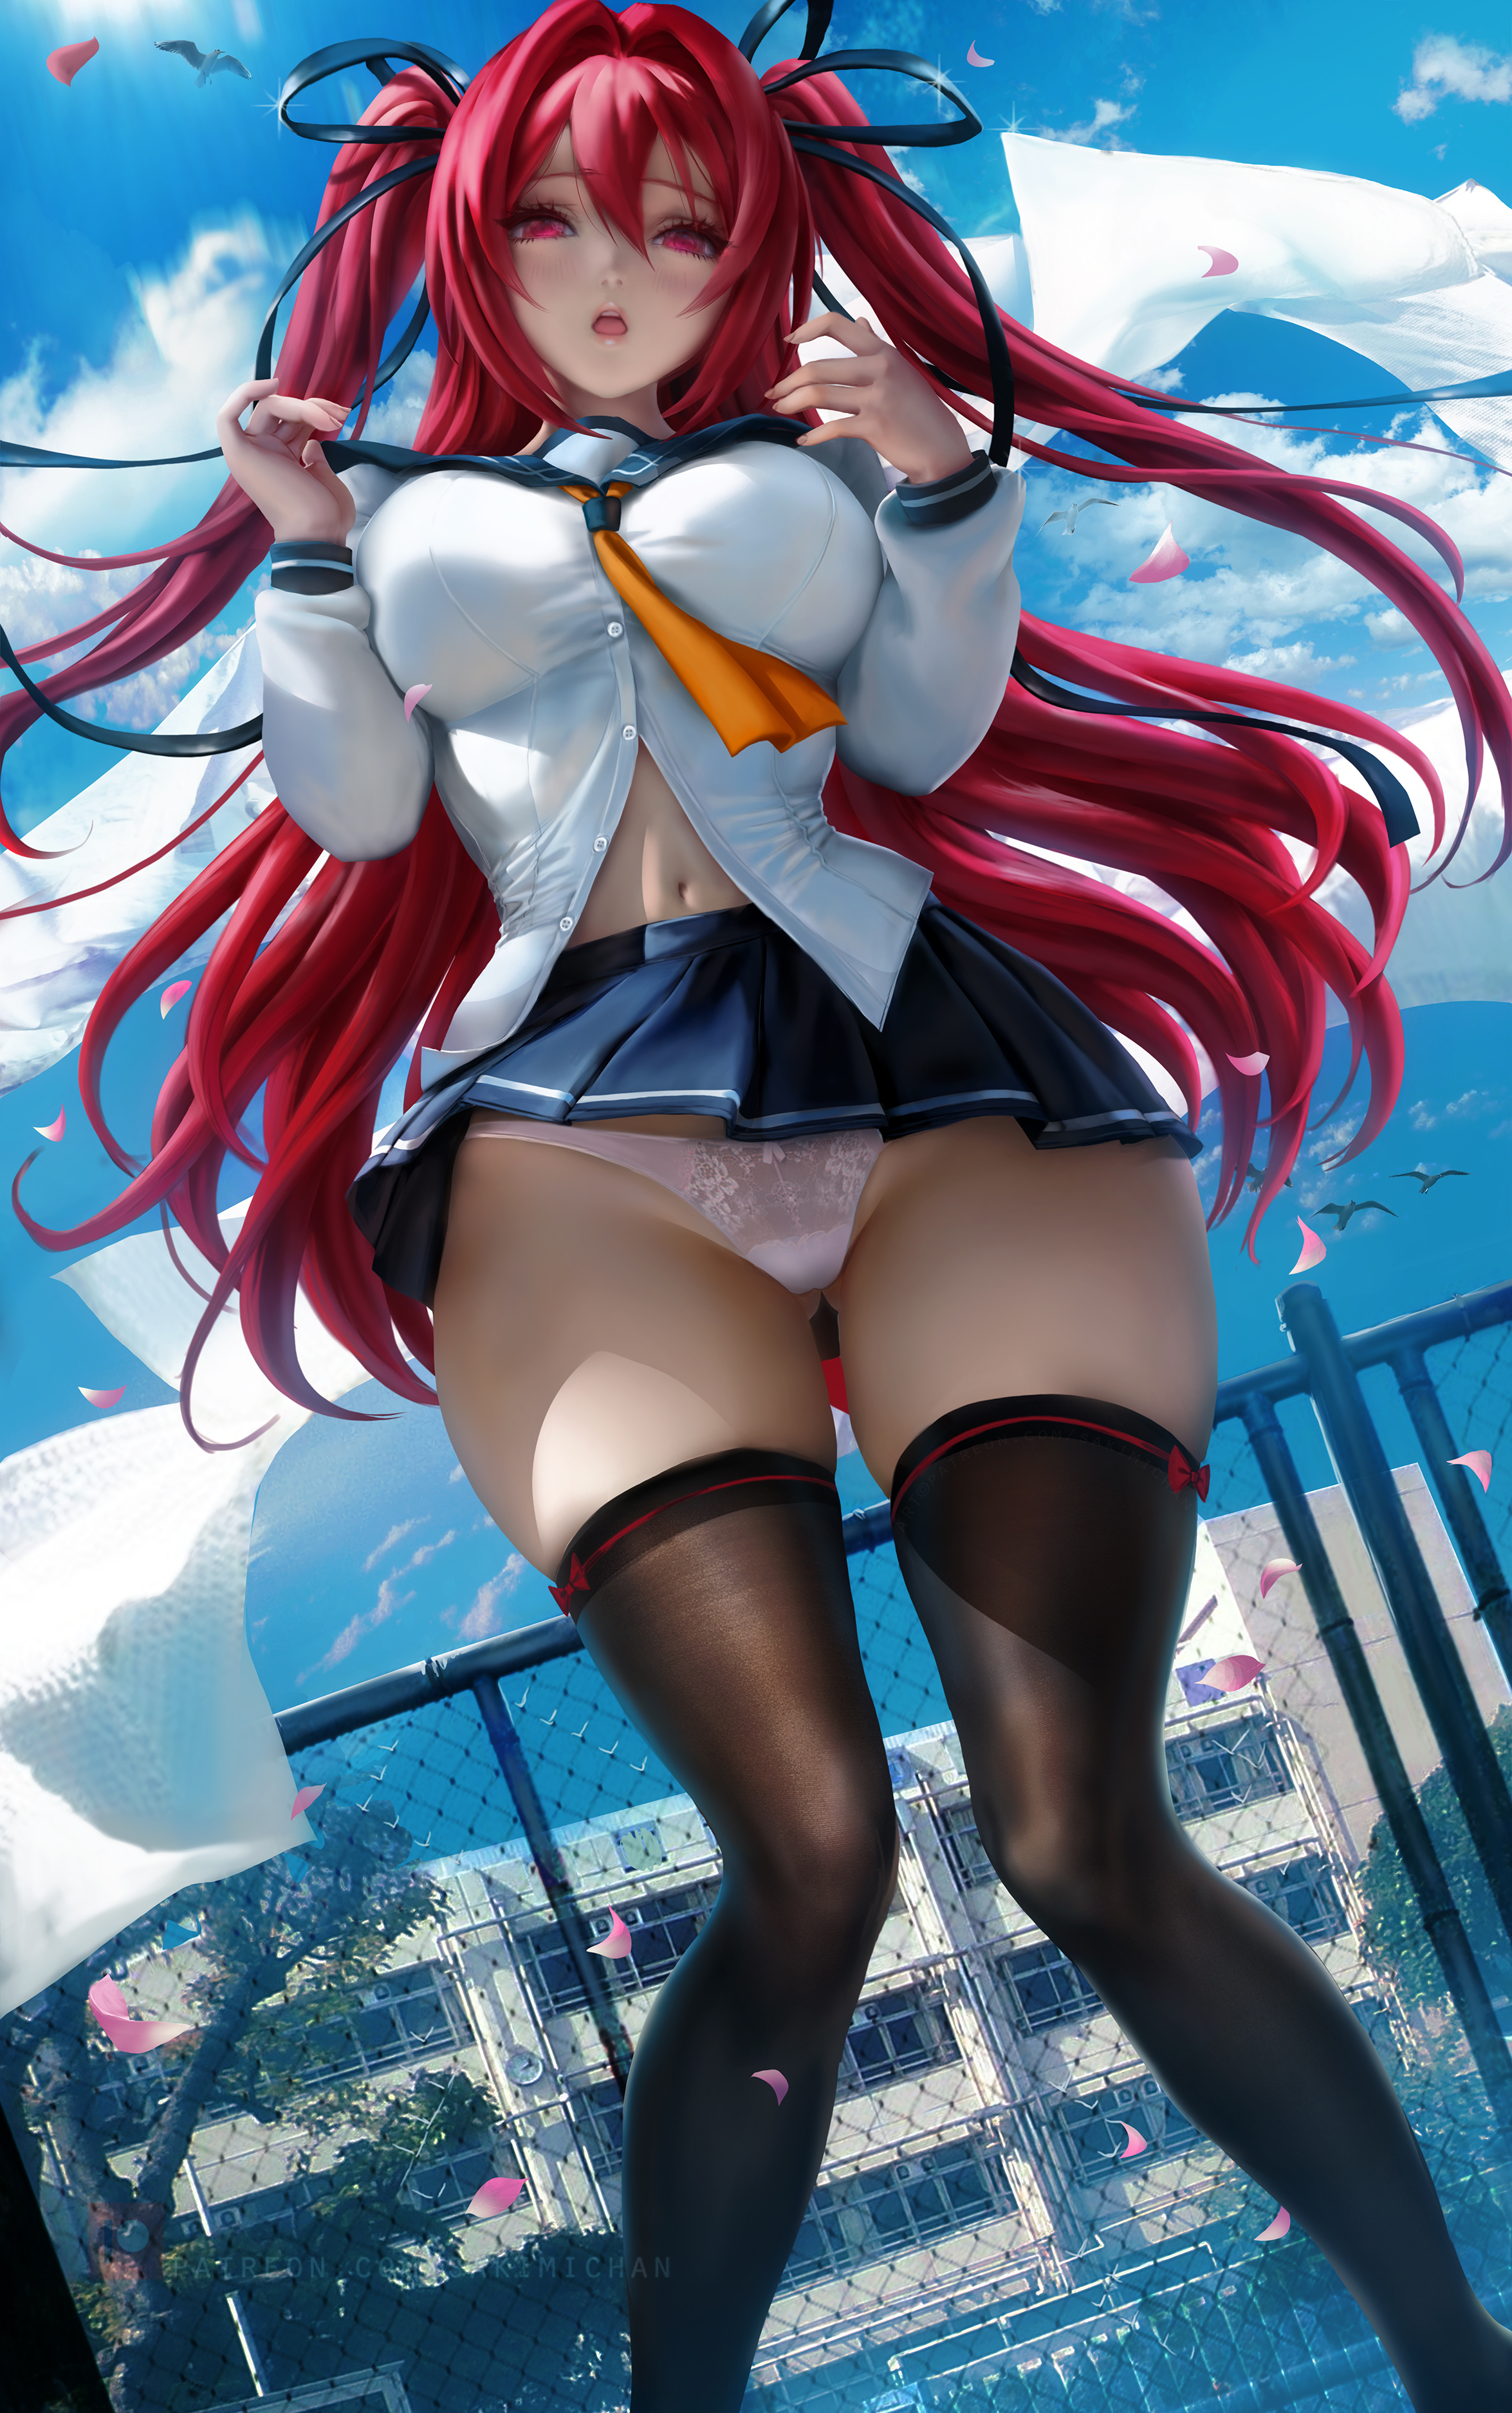 Anime 2350x3750 Naruse Mio Shinmai Maou no Testament anime anime girls redhead long hair bangs twintails hair ribbon hair accessories red eyes looking at viewer blushing open mouth sky clouds low-angle portrait display school uniform sailor uniform tie shirt belly miniskirt panties white panties underwear the gap thick thigh thigh-highs curvy upskirt windy frontal view 2D fantasy girl artwork drawing digital art illustration fan art Sakimichan cameltoe